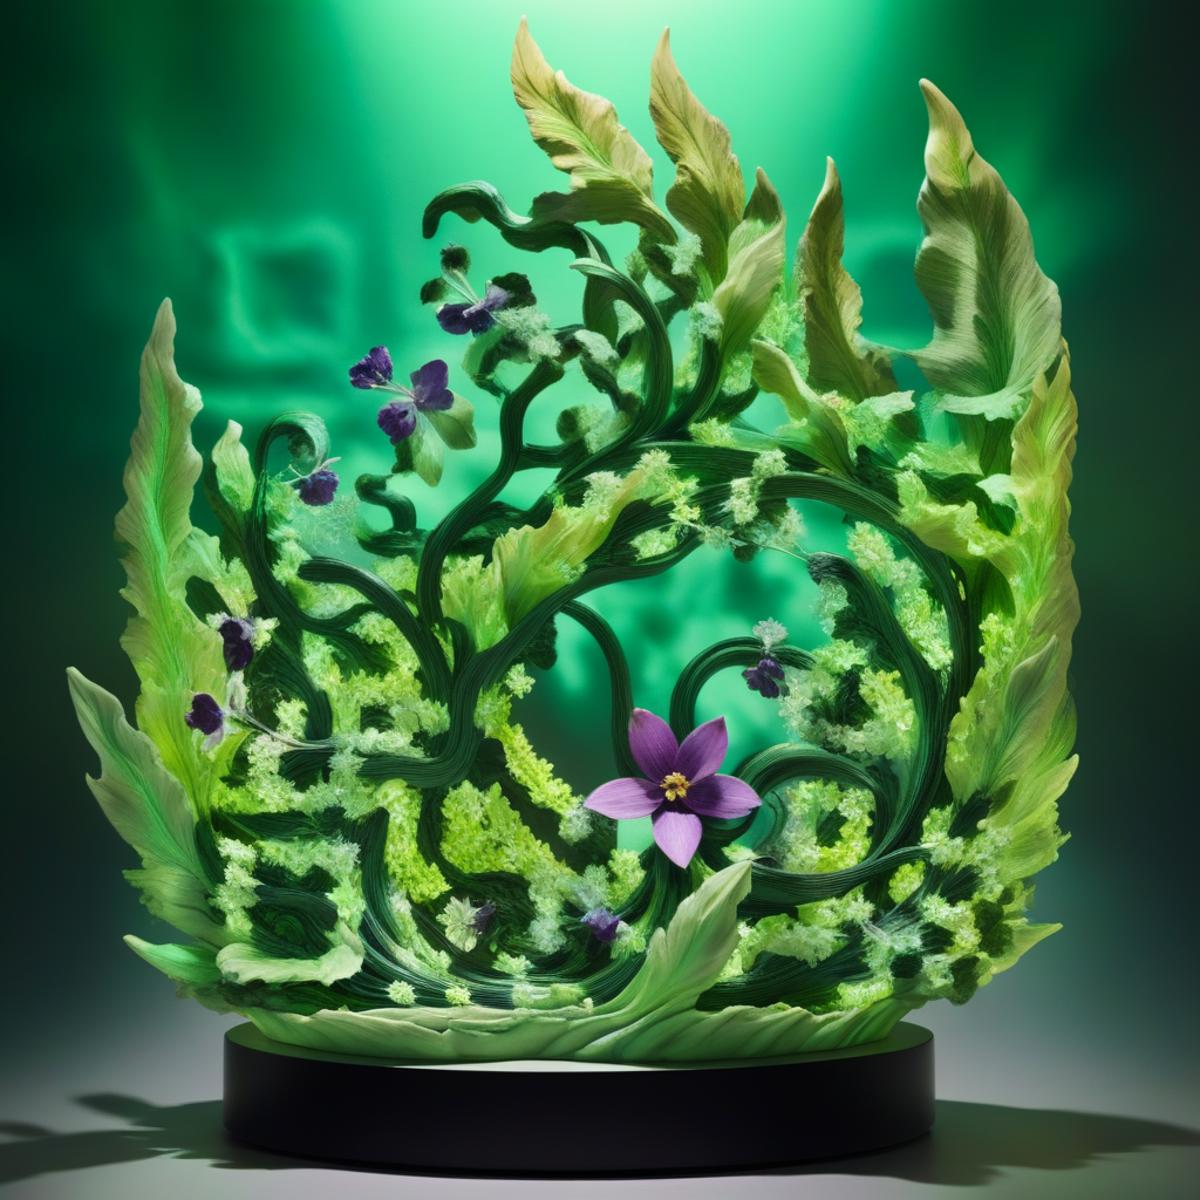 A Glass Art Sculpture of a Tree with Purple Flowers and Green Leaves.